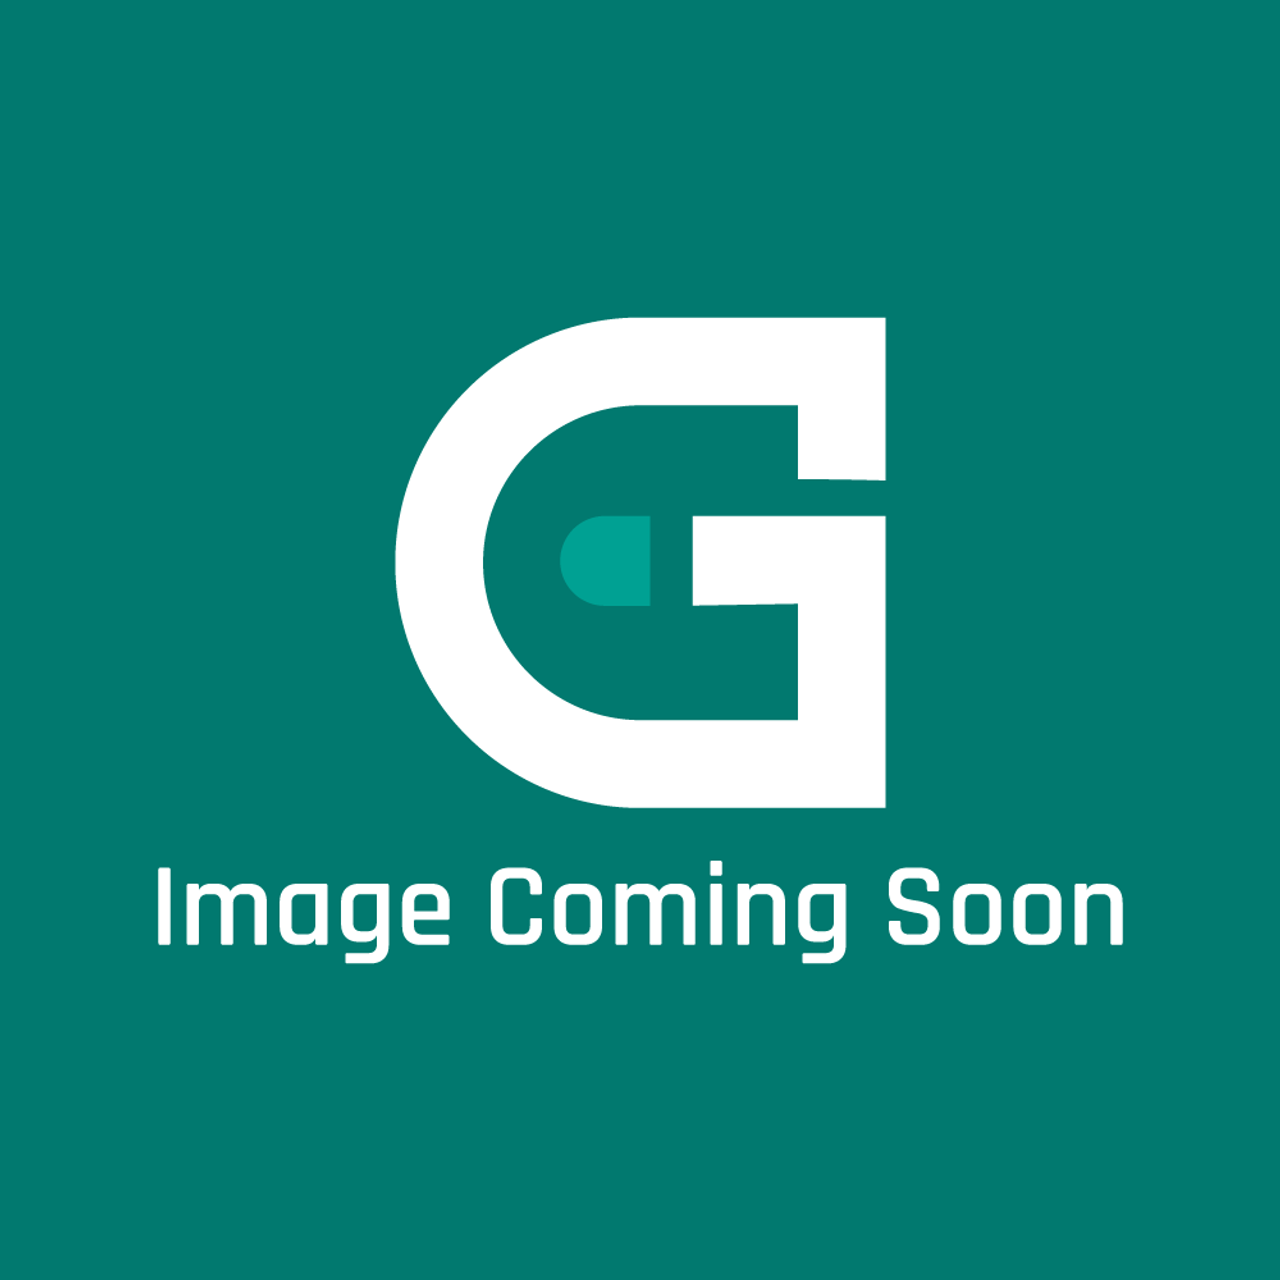 AGA Marvel F2959 - Plate Cover Conc Fxg (Kza019) - Image Coming Soon!